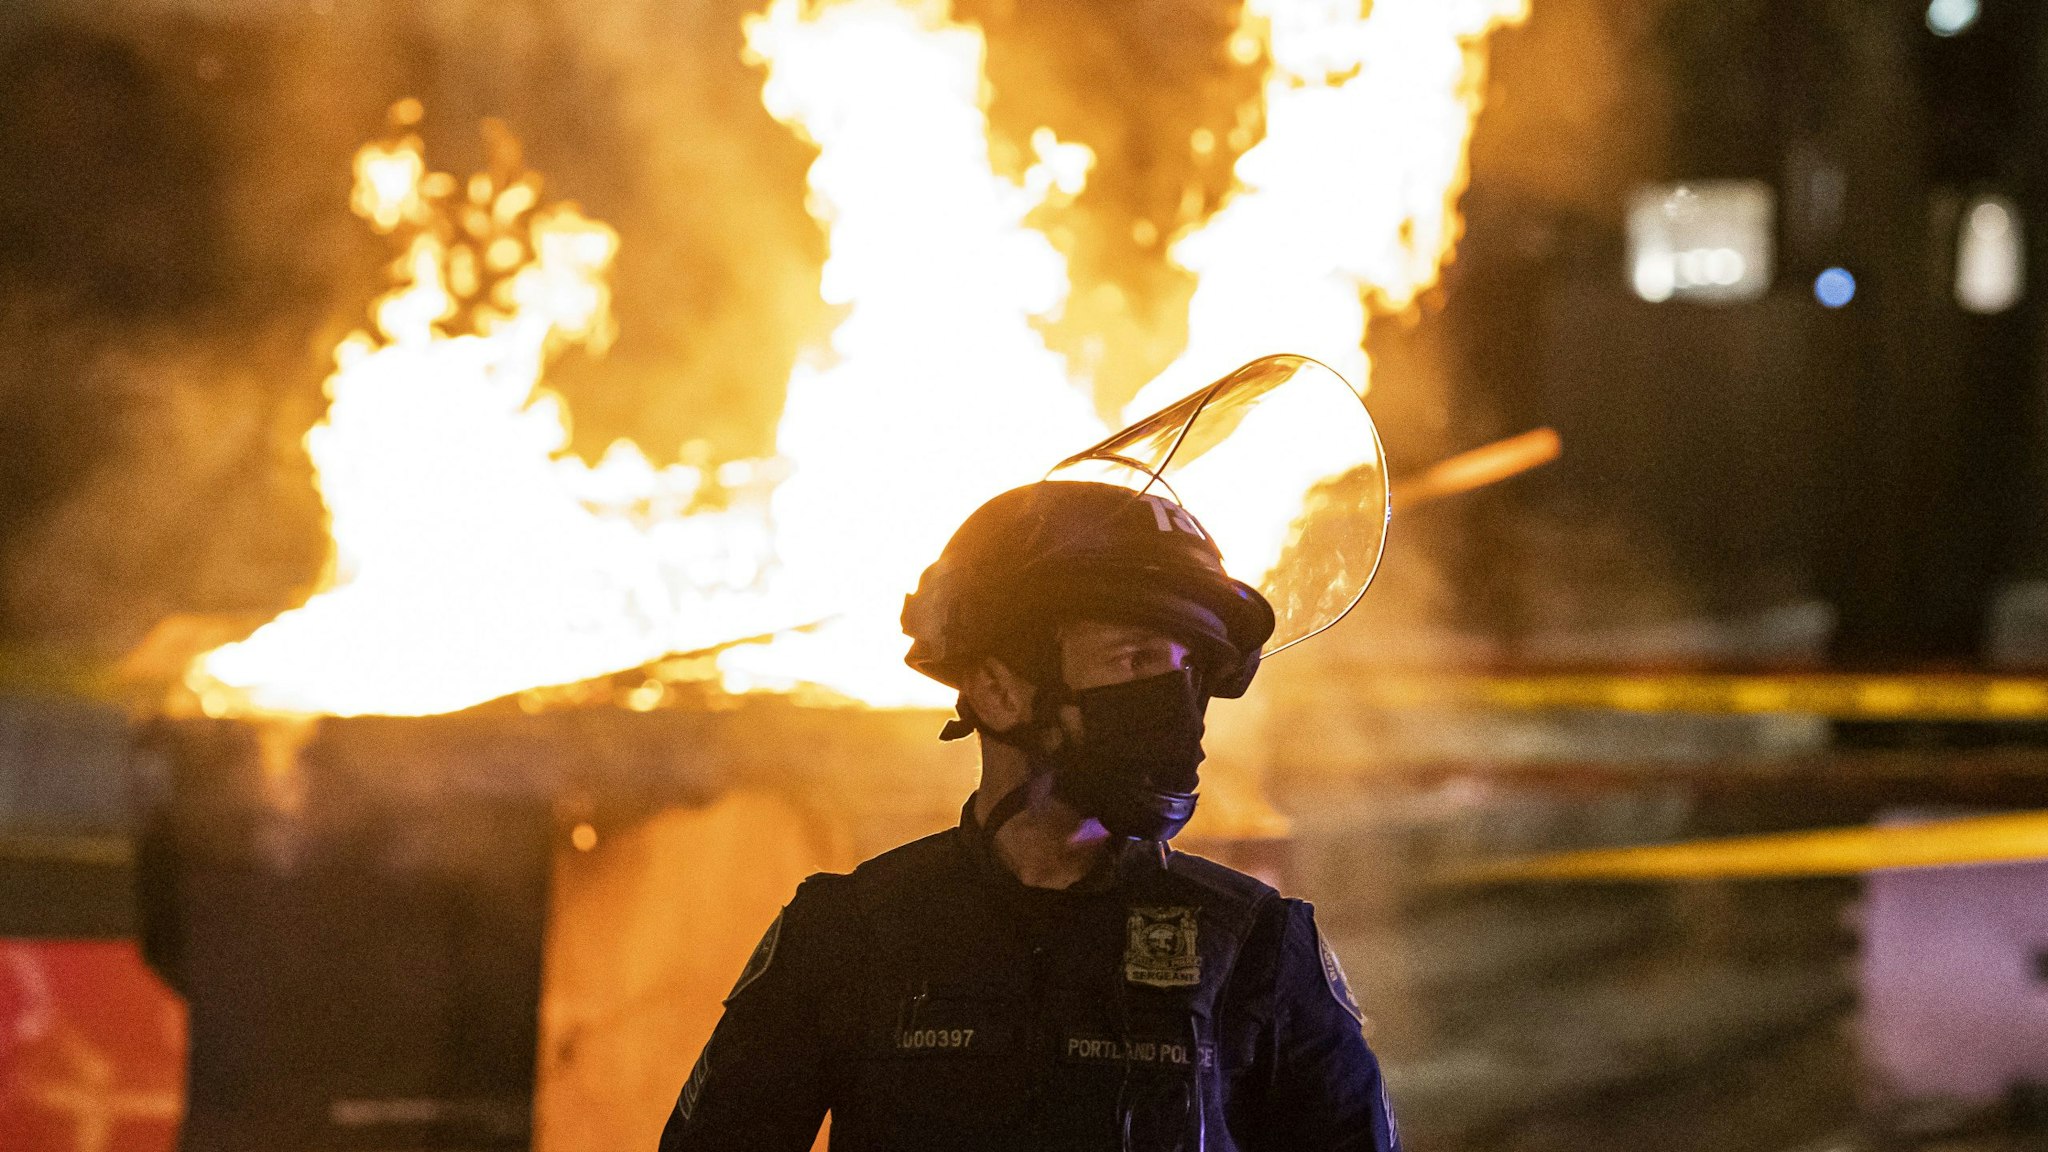 PORTLAND, OR - APRIL 17: Portland Police responds to a structure fire, set by protesters following the police shooting of a homeless man on April 17, 2021 in Portland, Oregon. The shooting comes amid heightened tensions between police and activists as the country awaits a verdict in the trial of Derek Chauvin.